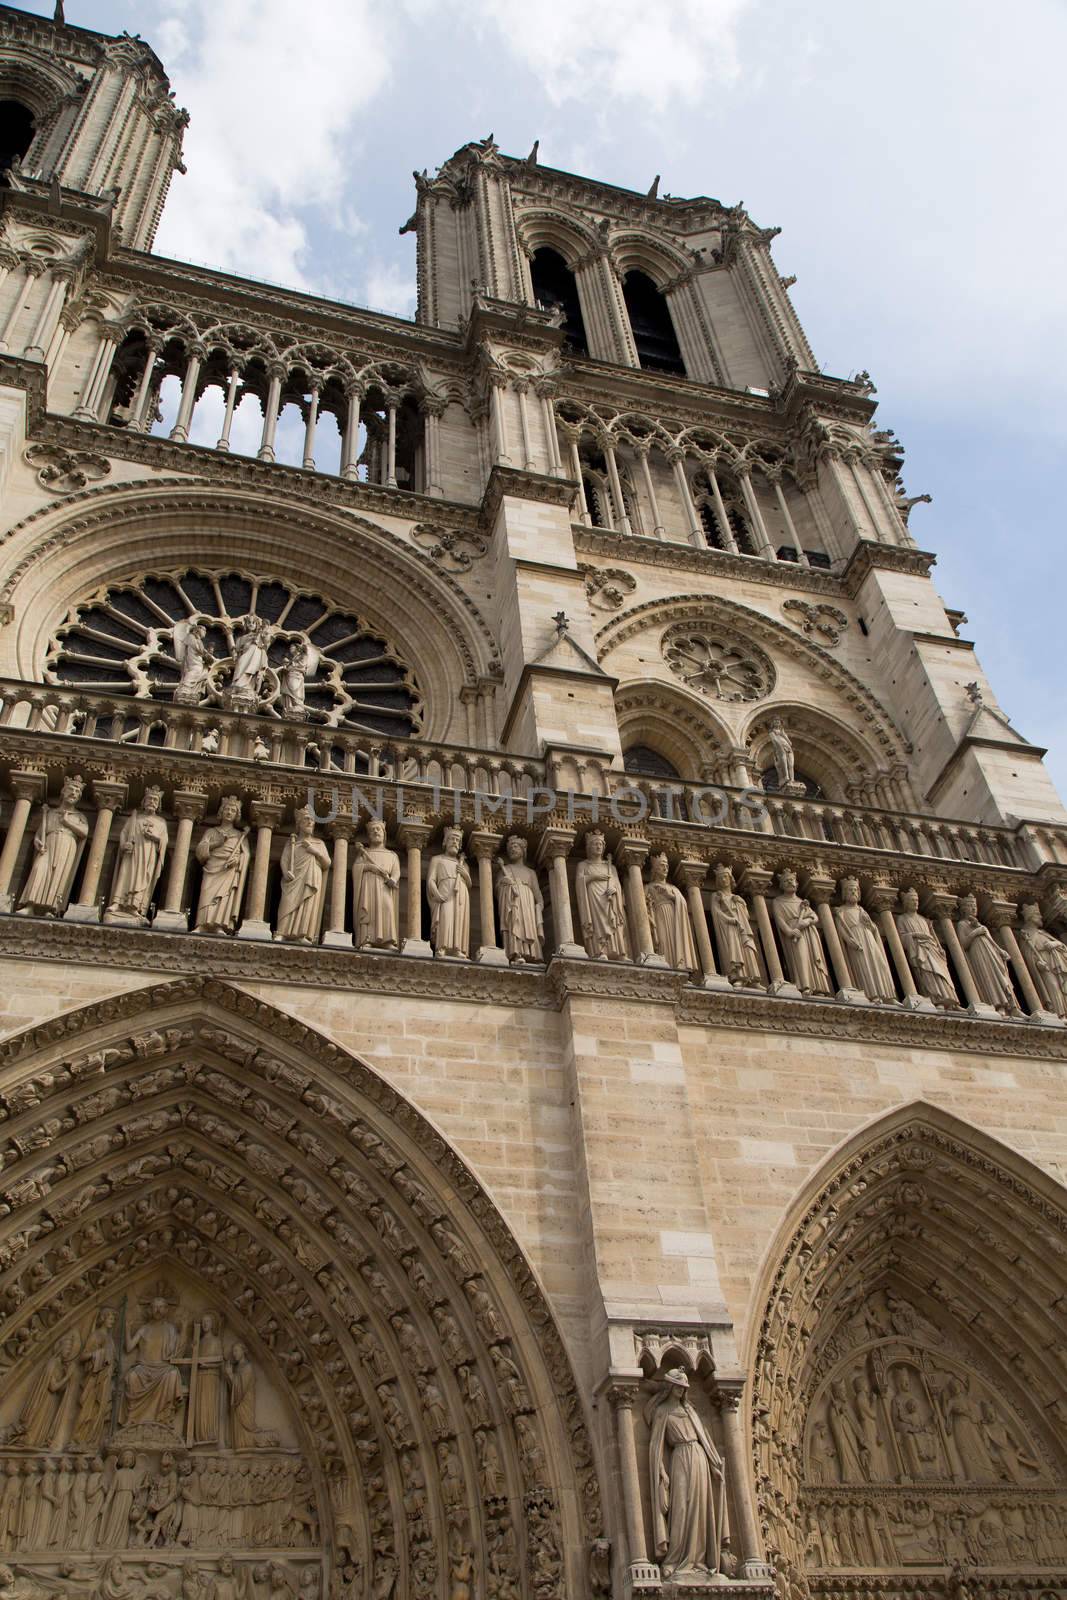 The Notre Dame Cathedral in Paris - France